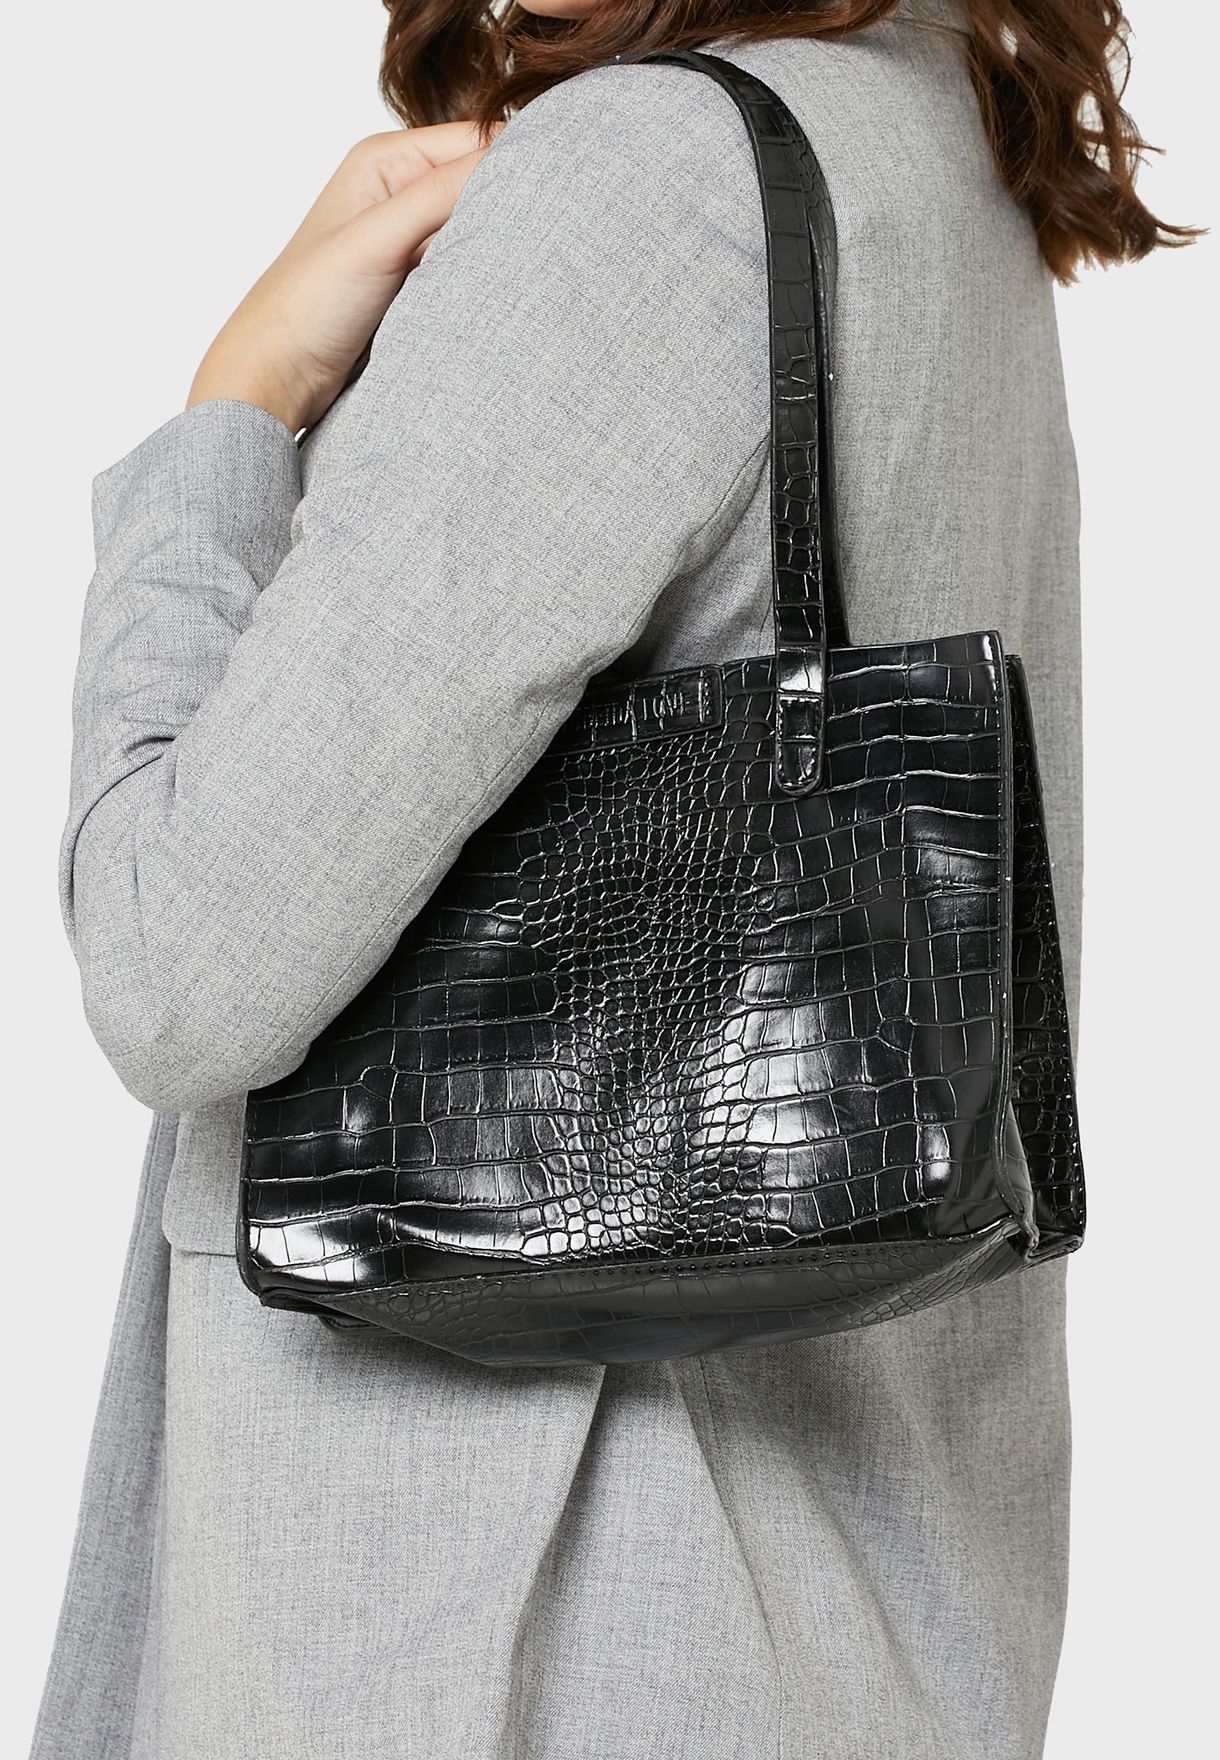 Croc Effect Tote With Pouch 